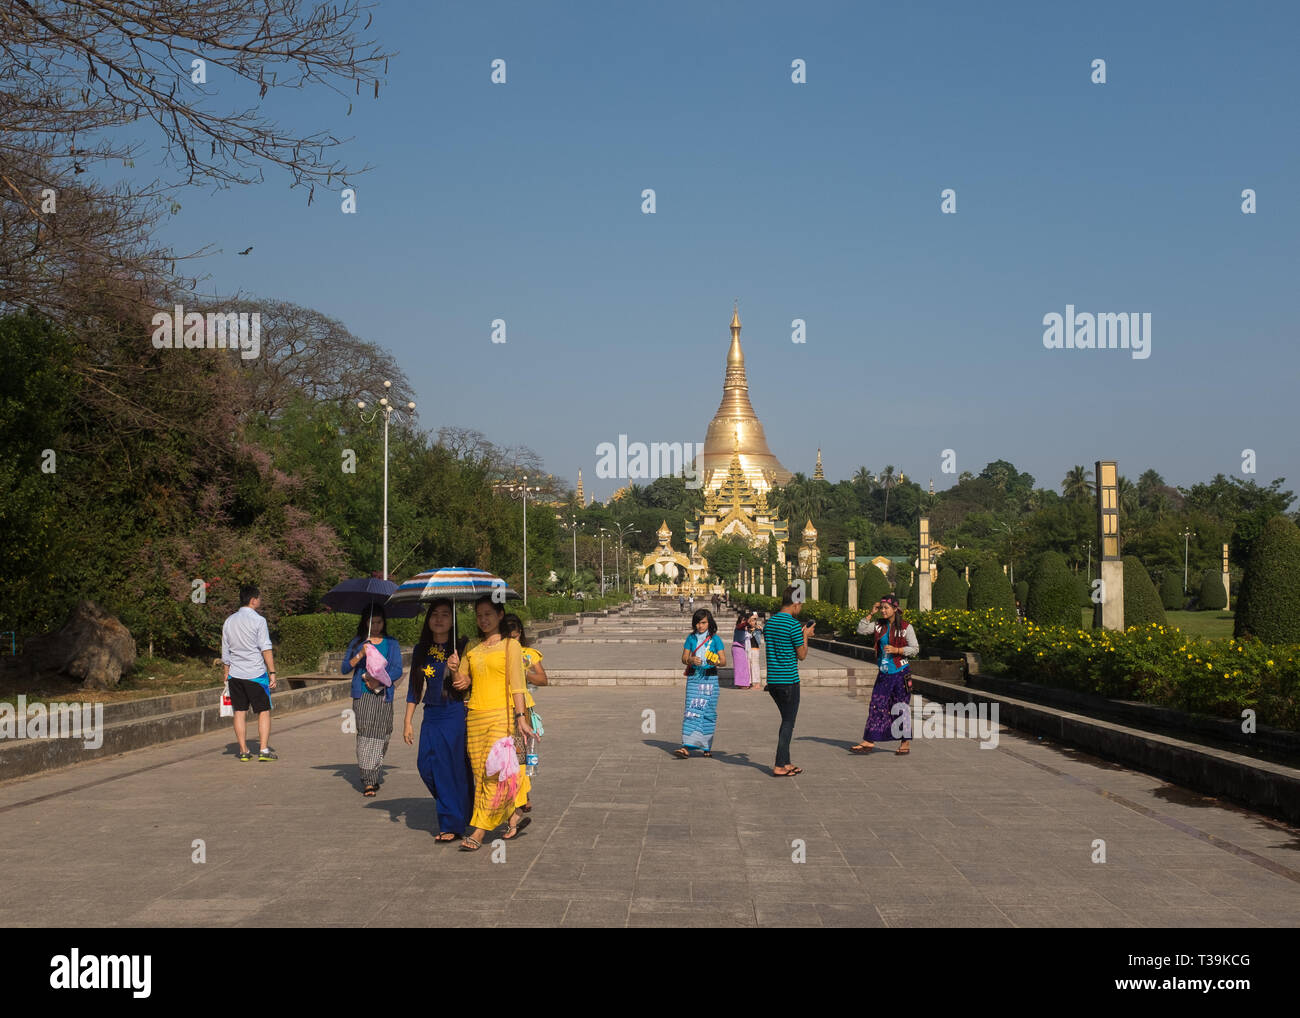 Young people in the People's Park & People's Square, Shwedagon Pagoda in the background, Yangon,Myanmar (Burma) Stock Photo